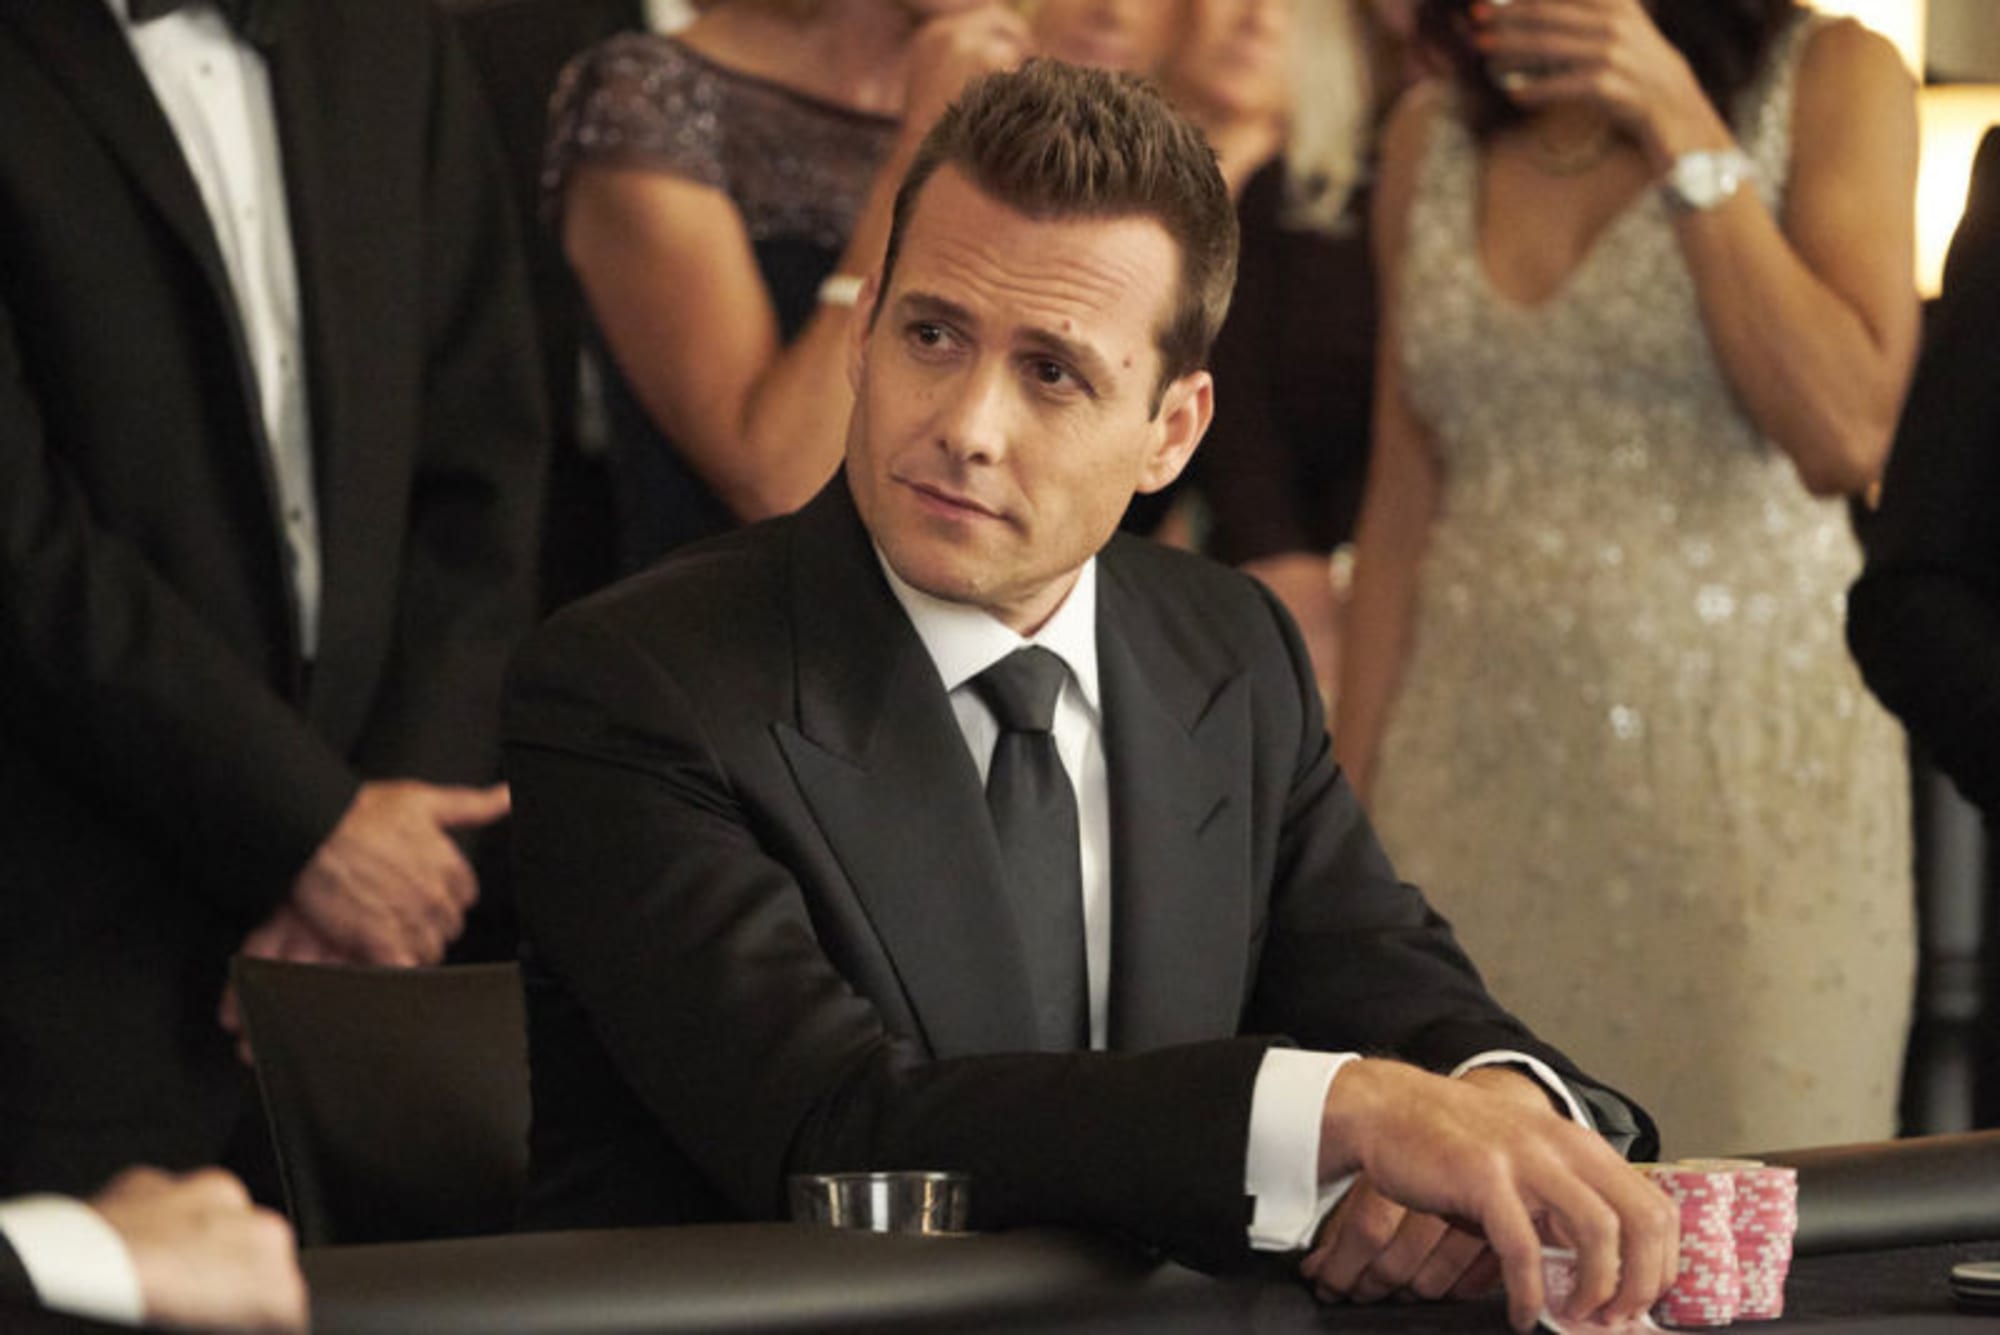 Suits Season 8 Suits Continues To Bring Gabriel Macht Closer To The Top